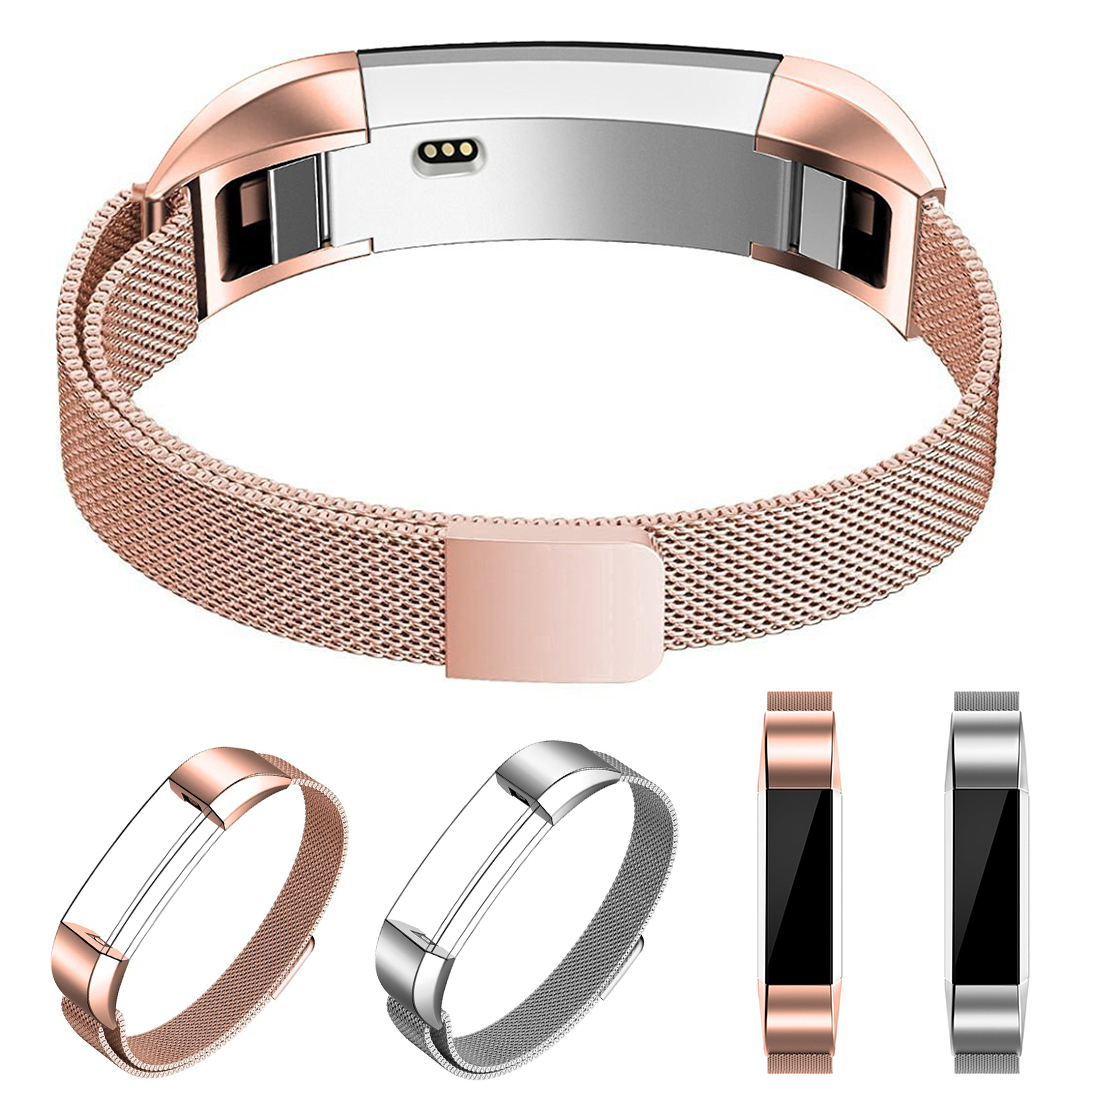 Stainless Mesh Milanese Metal Watchband Replacement Wristband Band Strap for Fitbit Alta HR - Rose Golden